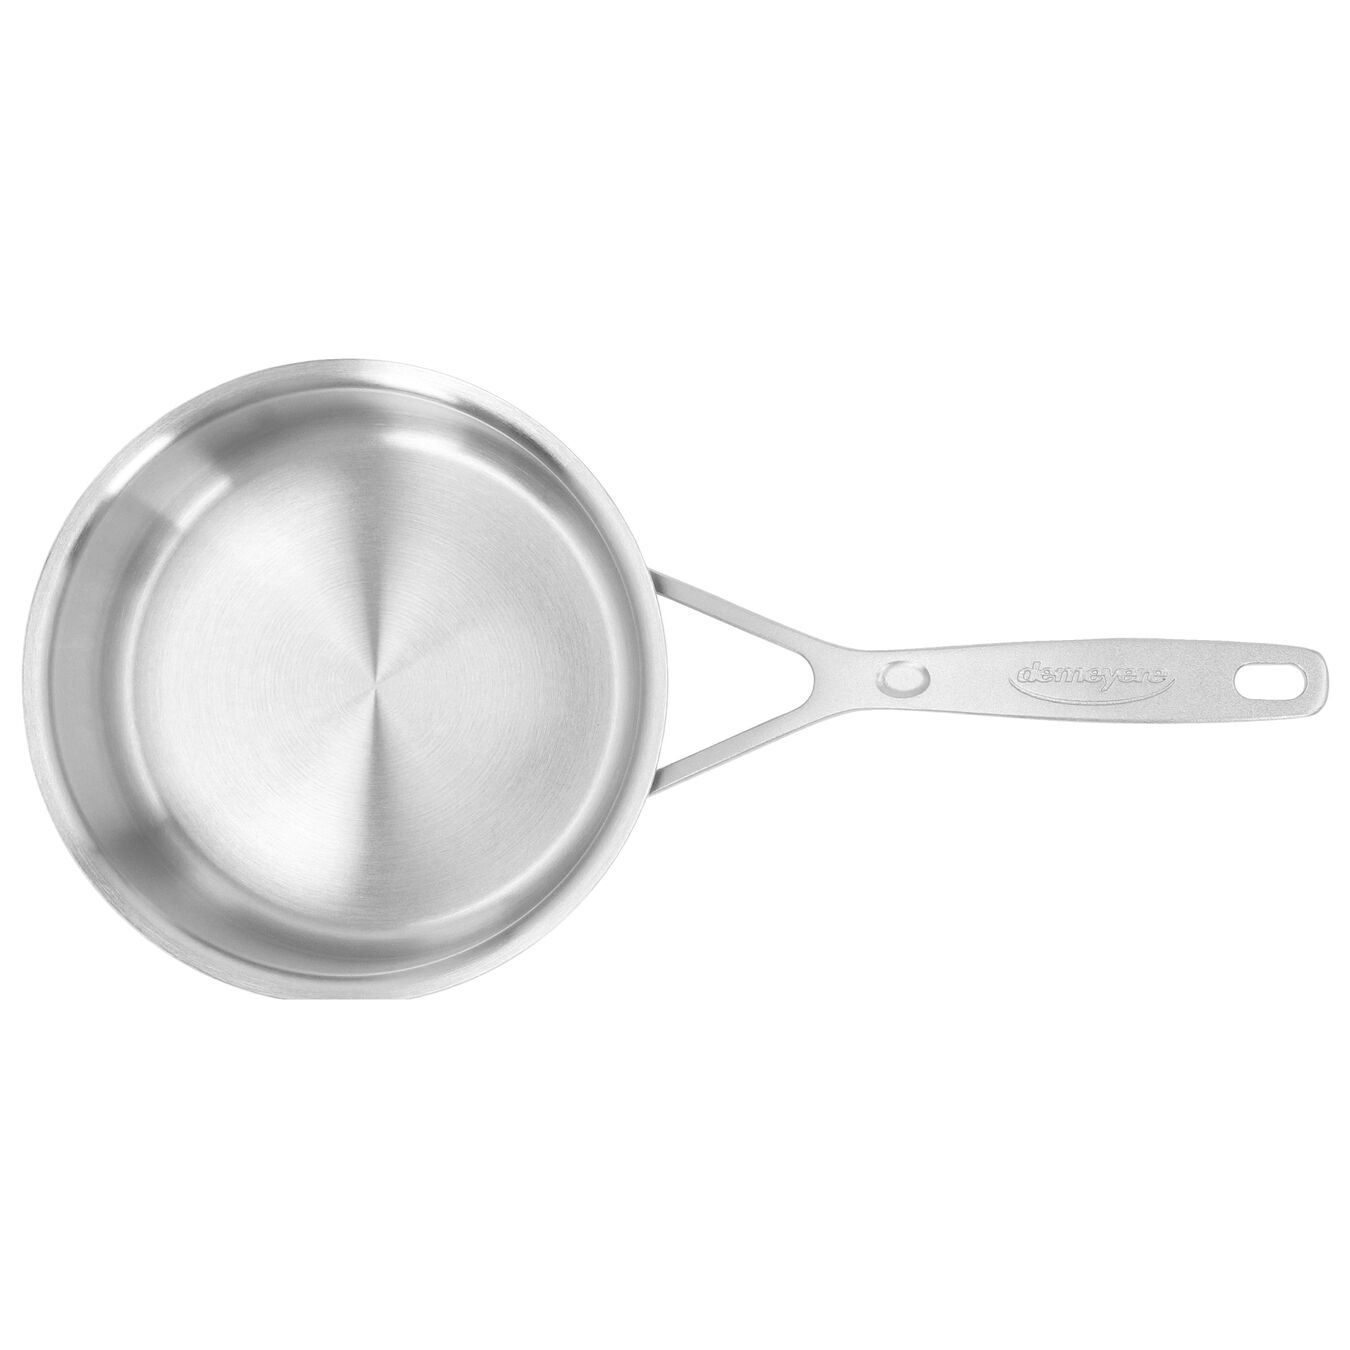 2.2 l 18/10 Stainless Steel round Sauce pan with lid, silver,,large 6